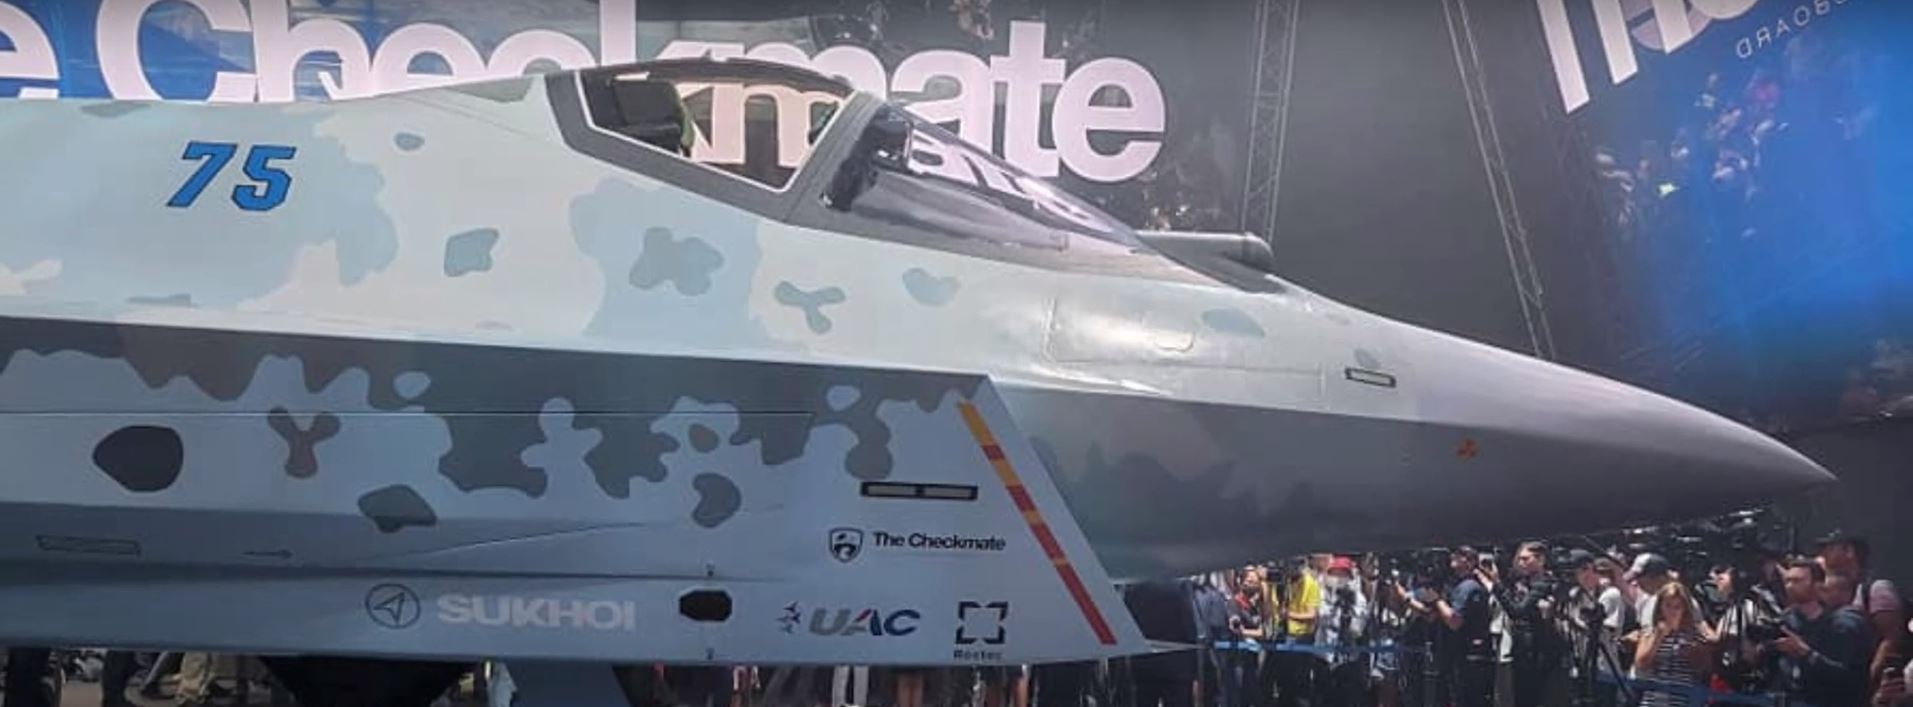 New Sukhoi fifth-generation stealth fighter at MAKS air show-4